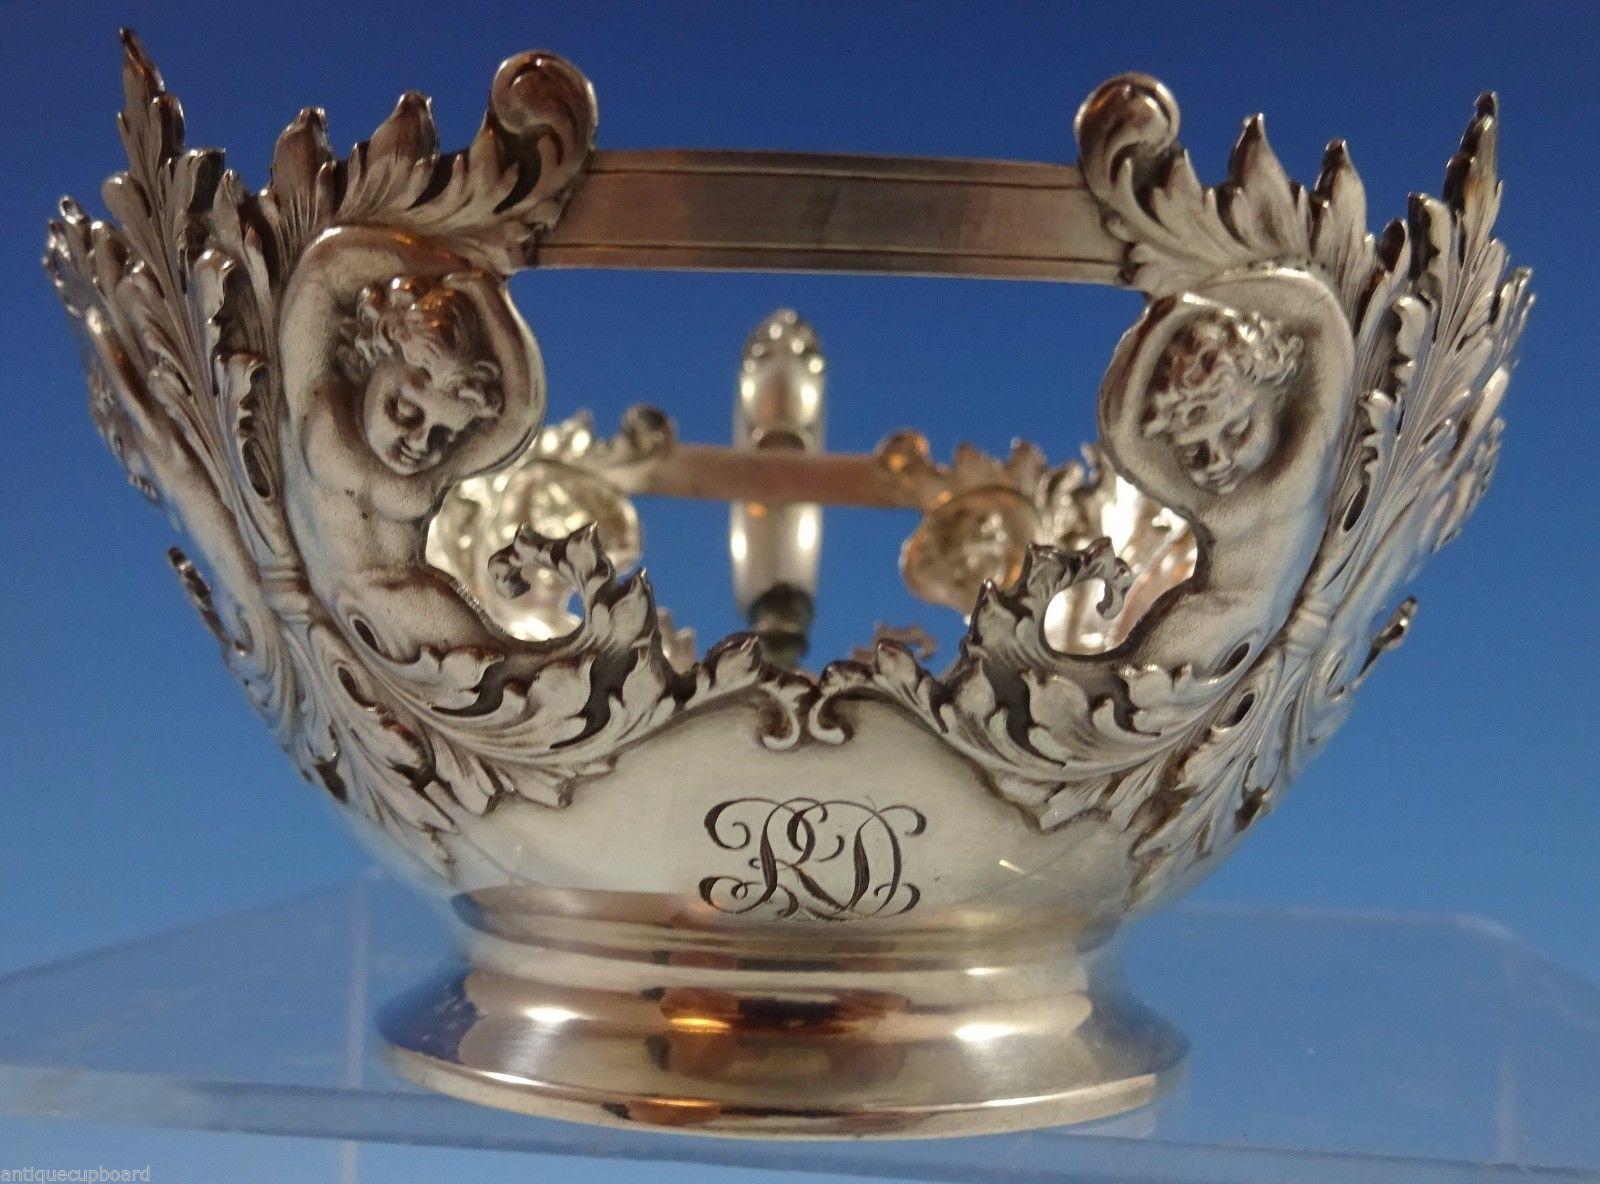 Tiffany & Co.

Figural sterling silver bouillon cup frame made by Tiffany & Co. The cup has fascinating cherubs and has a RD monogram (see photo). The cup measures 2 x 3 1/2 and weighs 2.44 ozt. It is in excellent condition. (does not include a